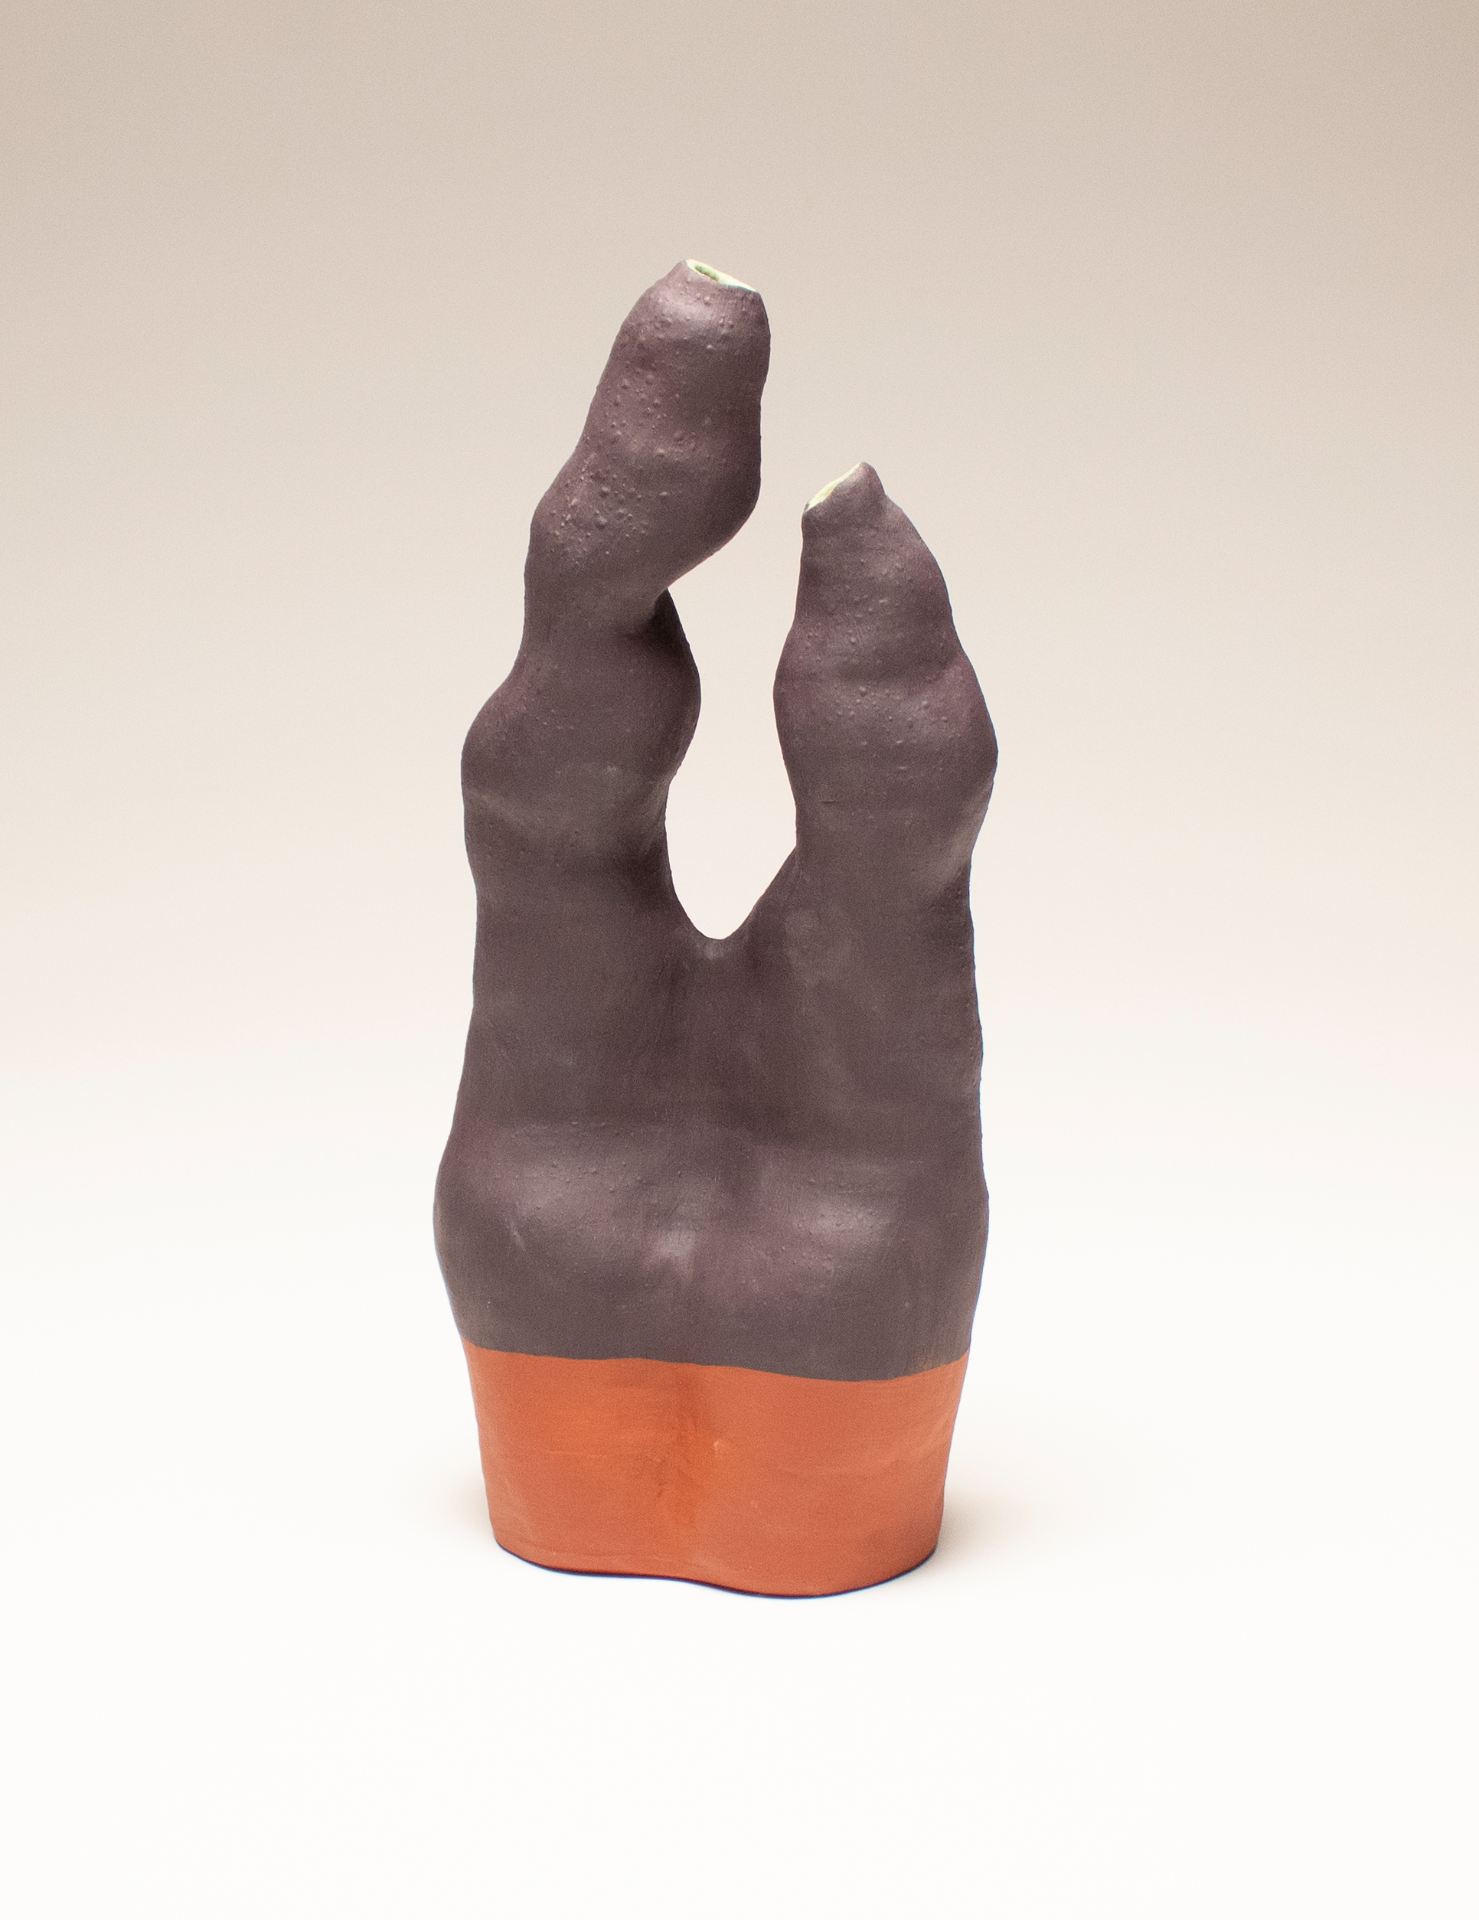 Sculpting with Clay: The Portrait  Grades 3-5 - One River School Westport